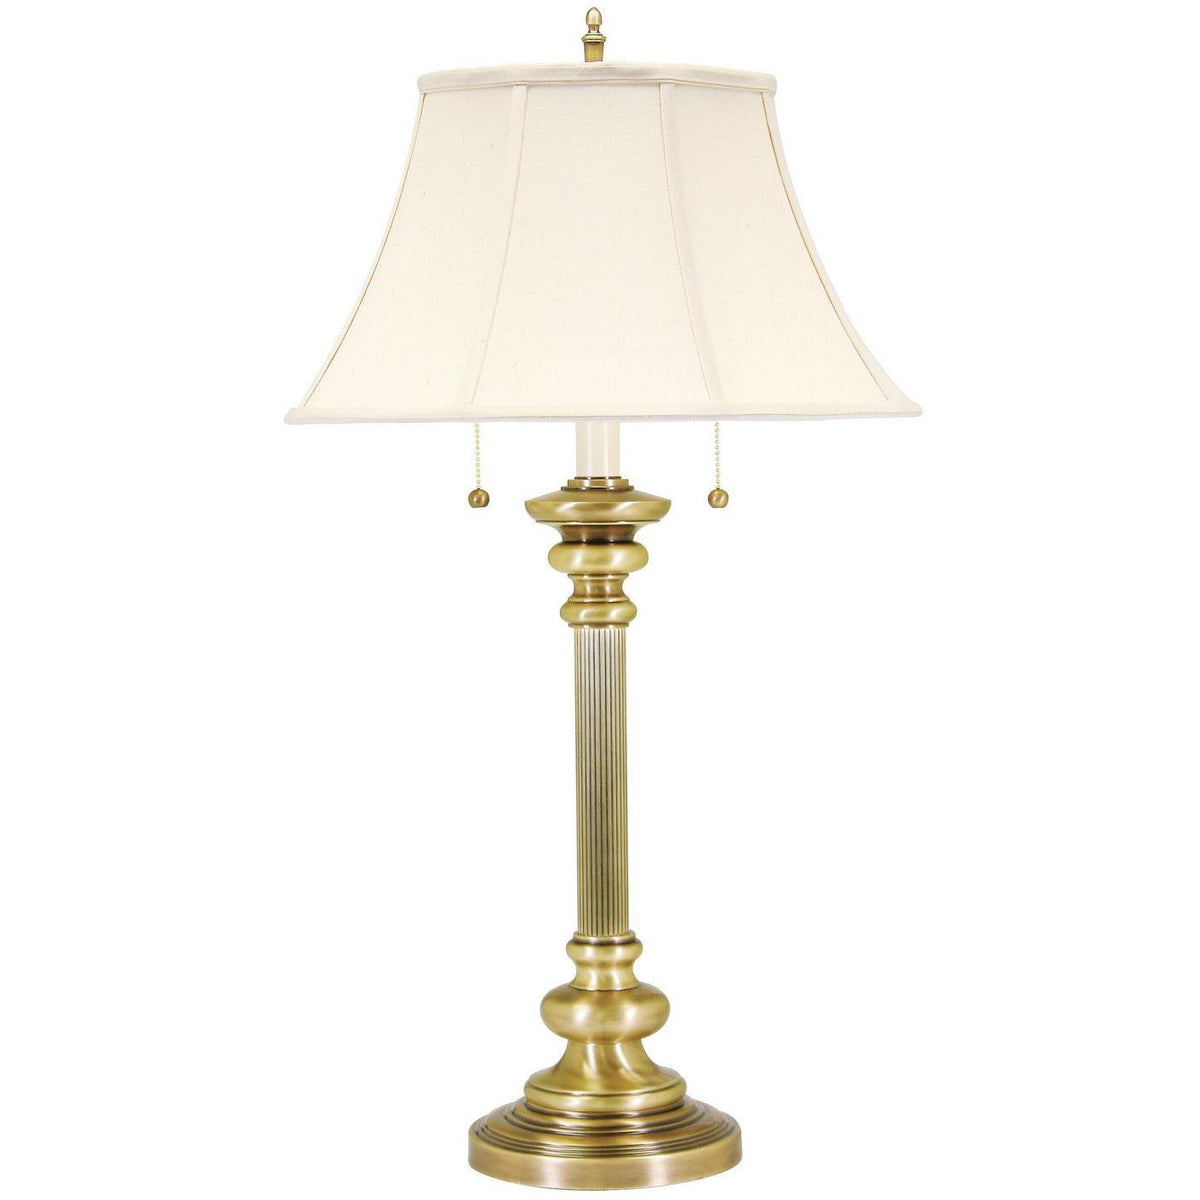 House of Troy - Newport Two Light Table Lamp - N651-AB | Montreal Lighting & Hardware